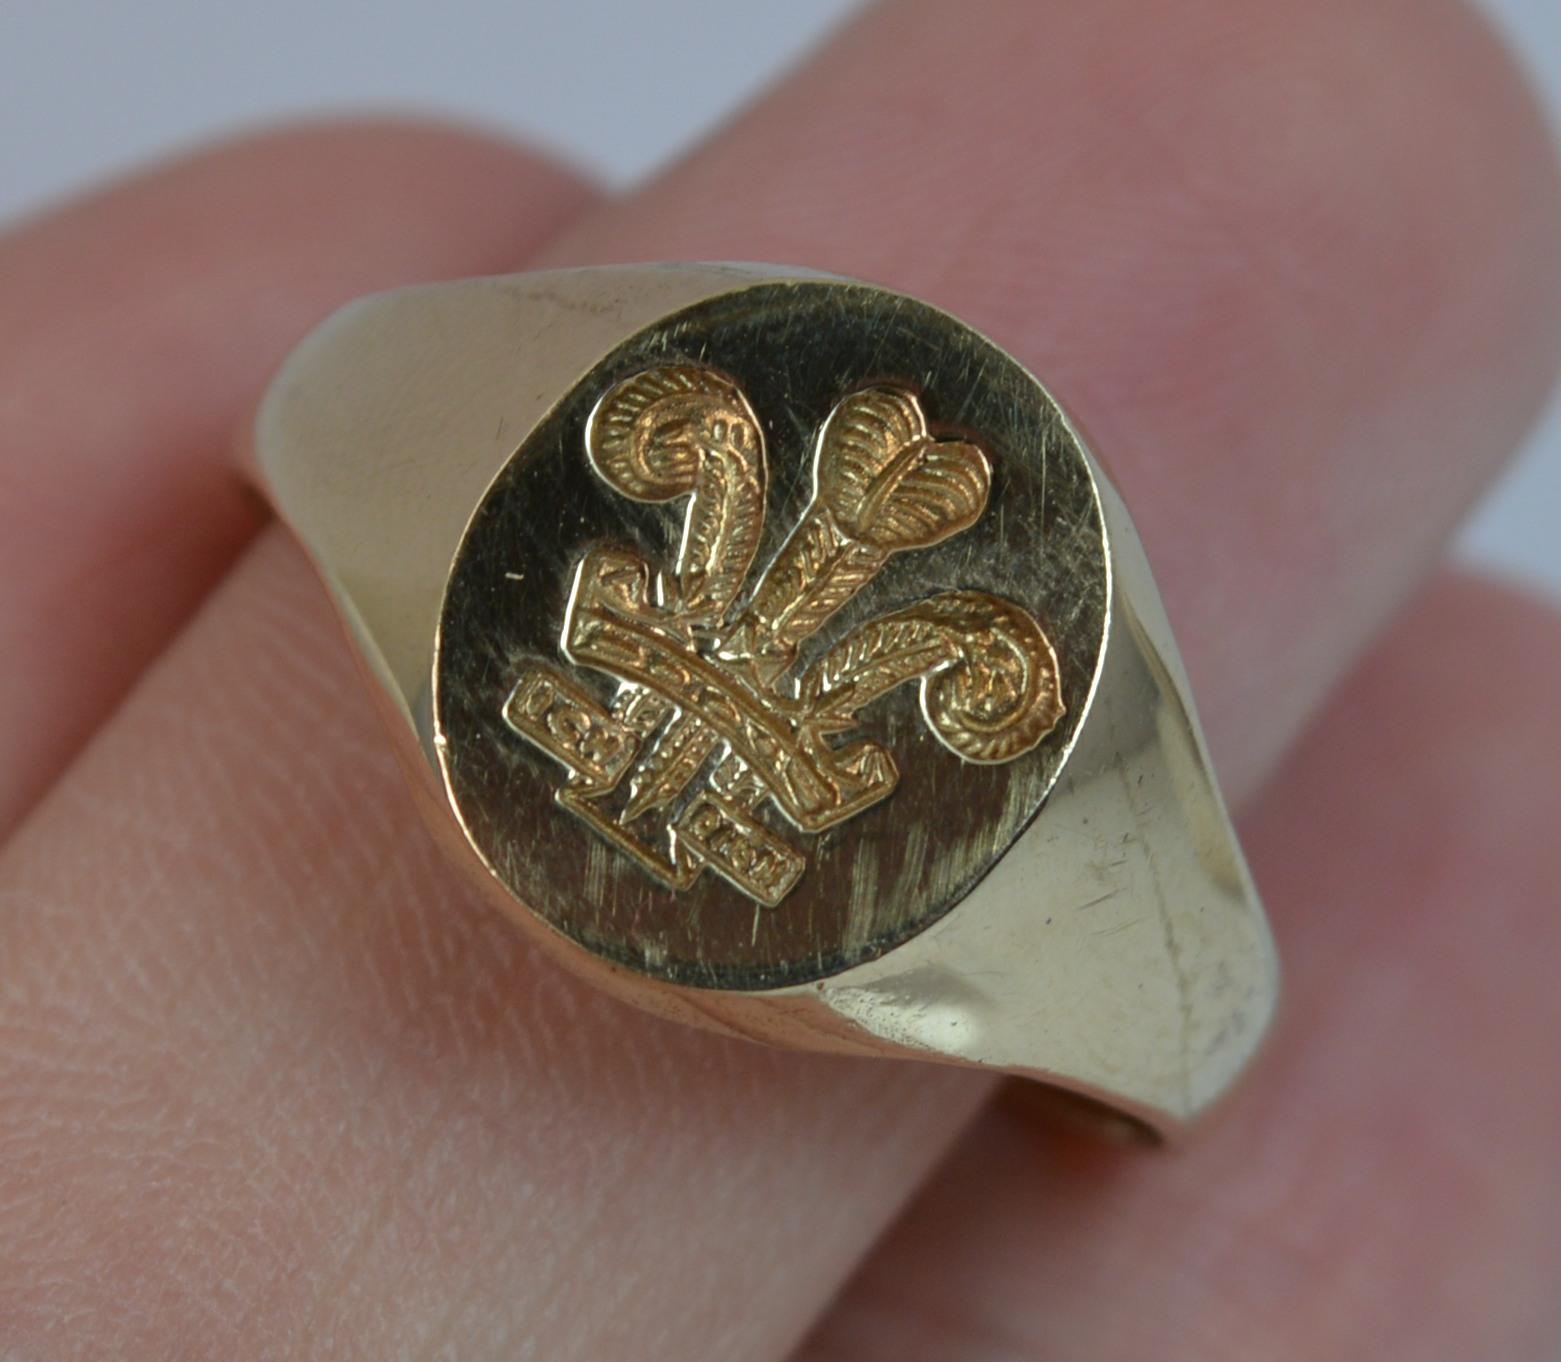 prince of wales signet ring